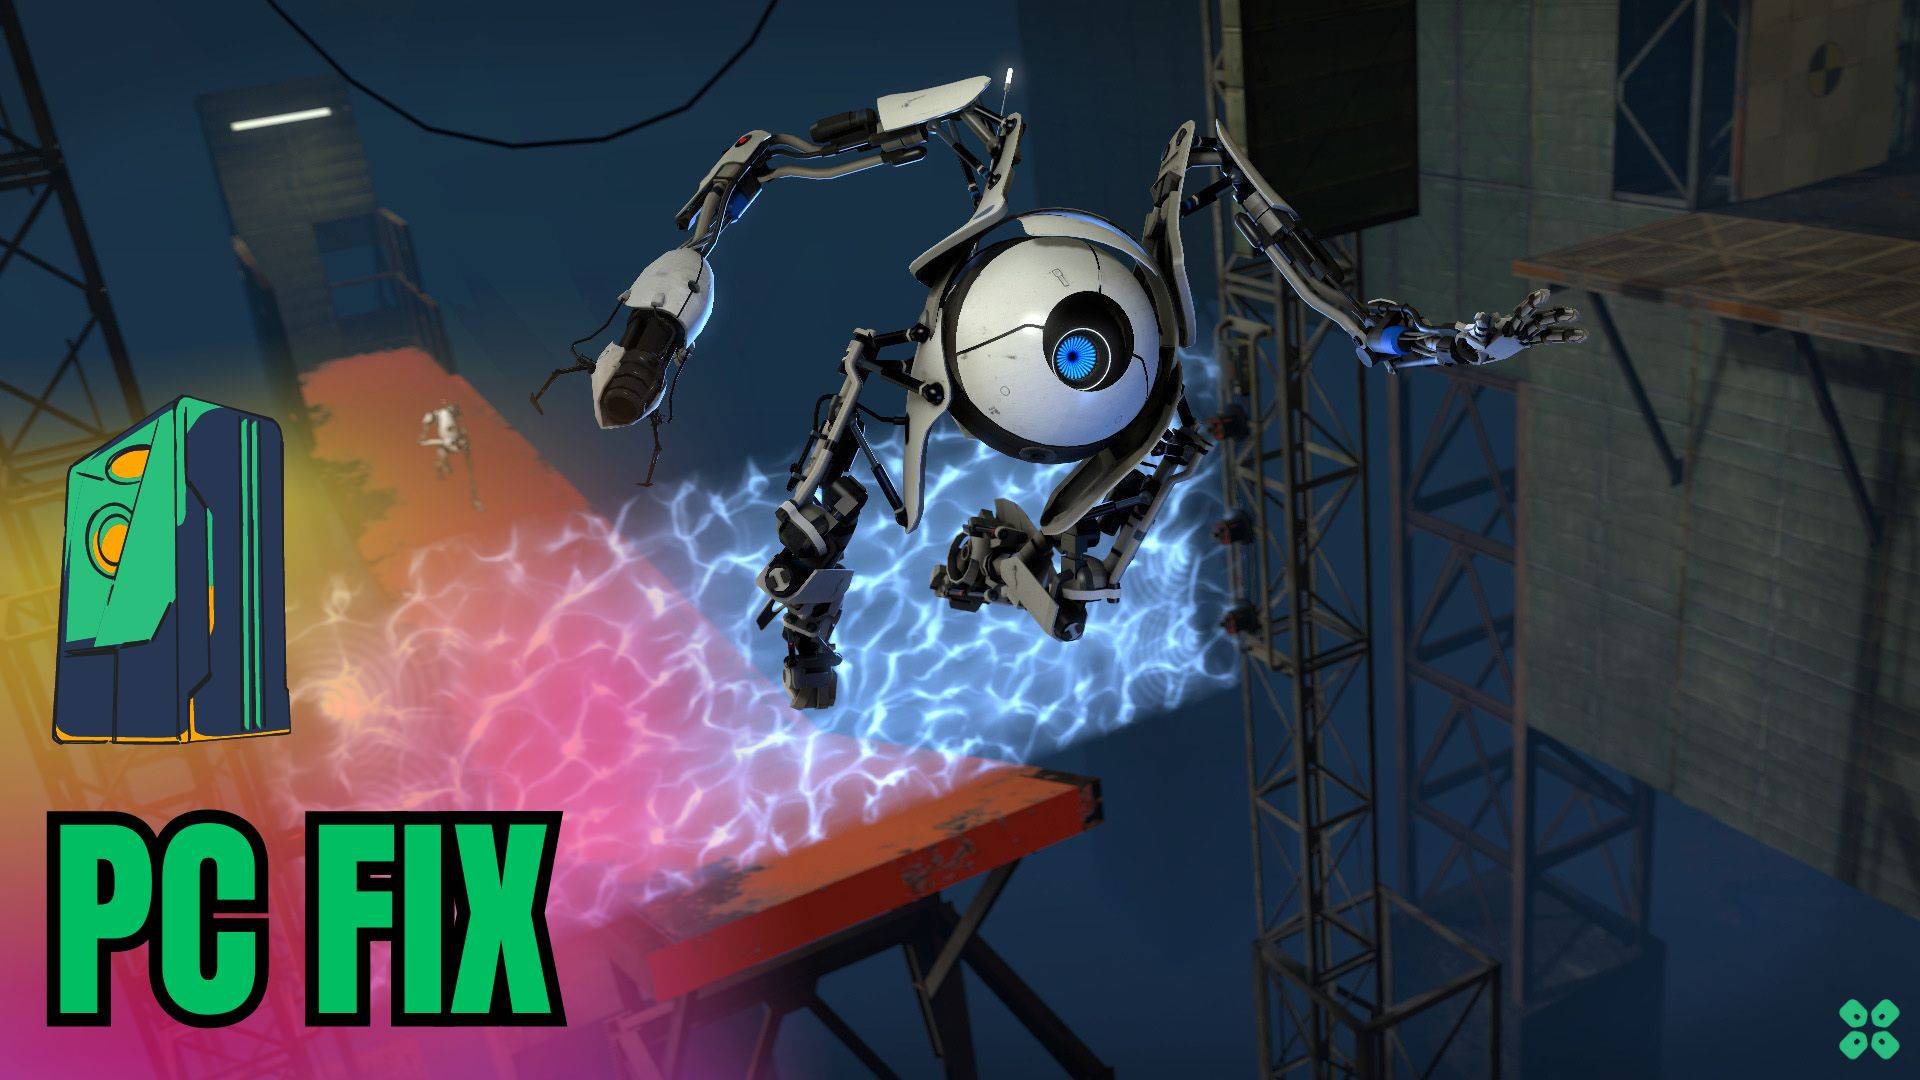 Artwork of Portal 2 and its fix of lagging by TCG